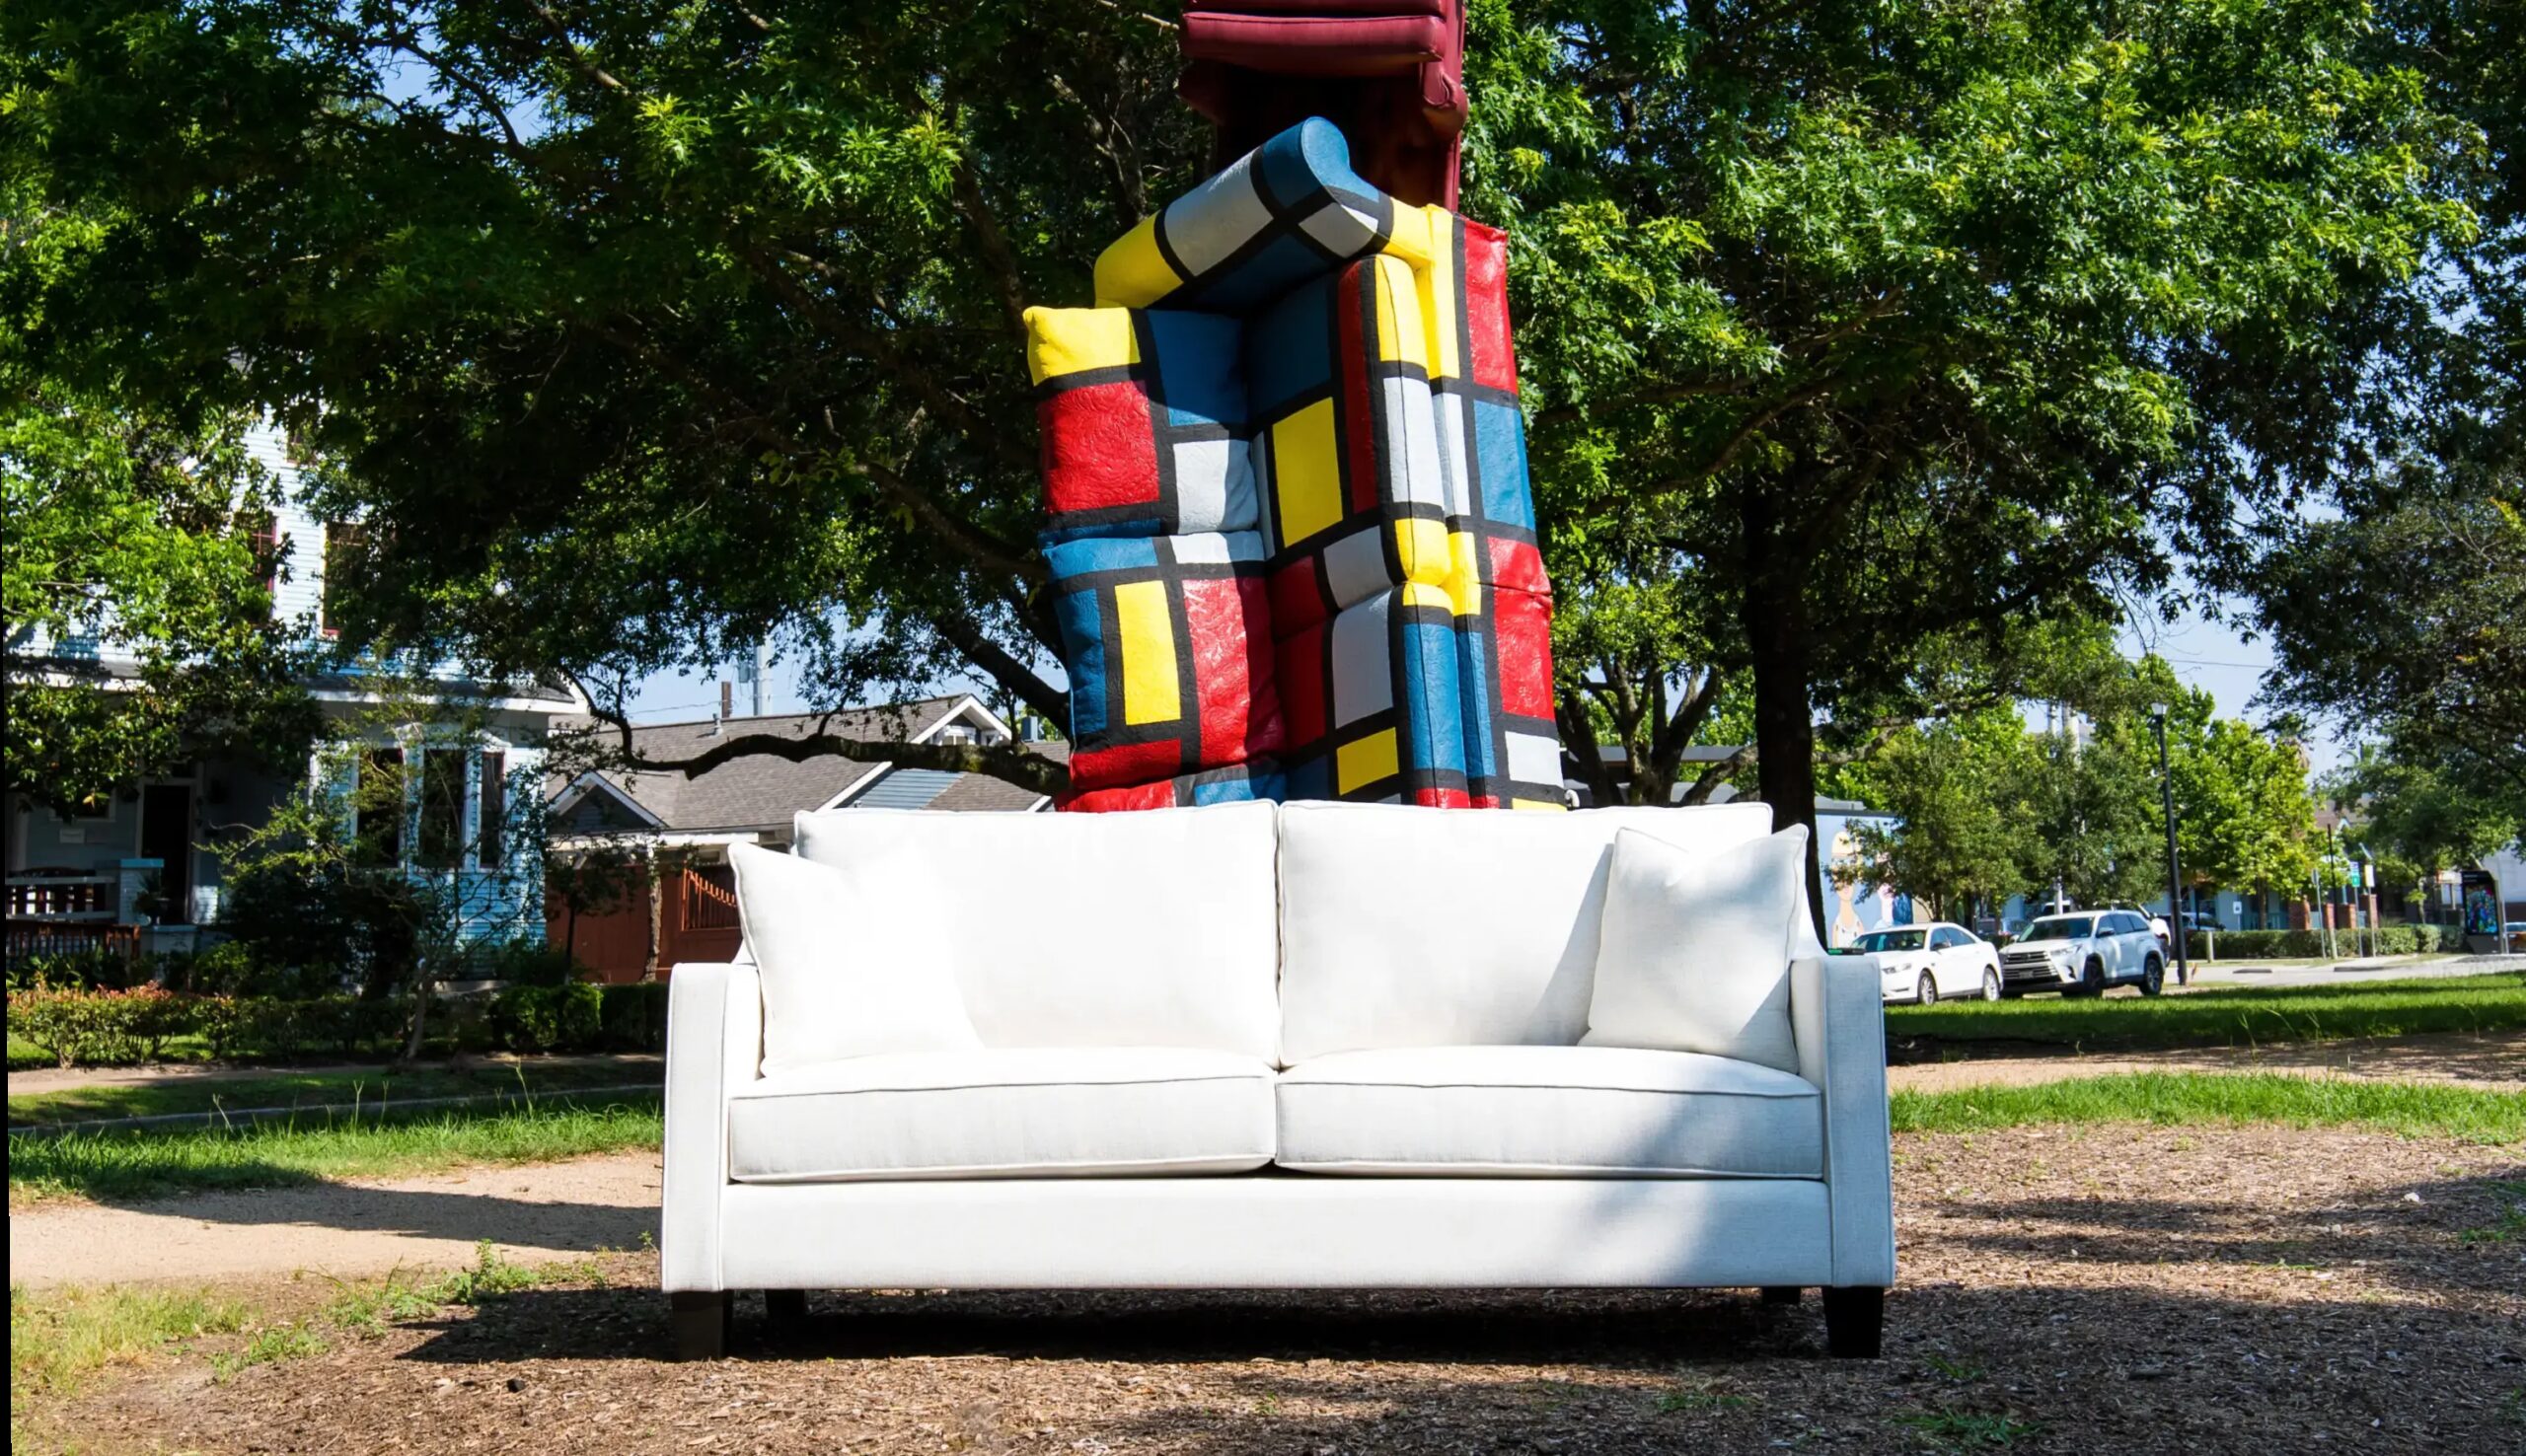 Heights couch in front of sculpture outside